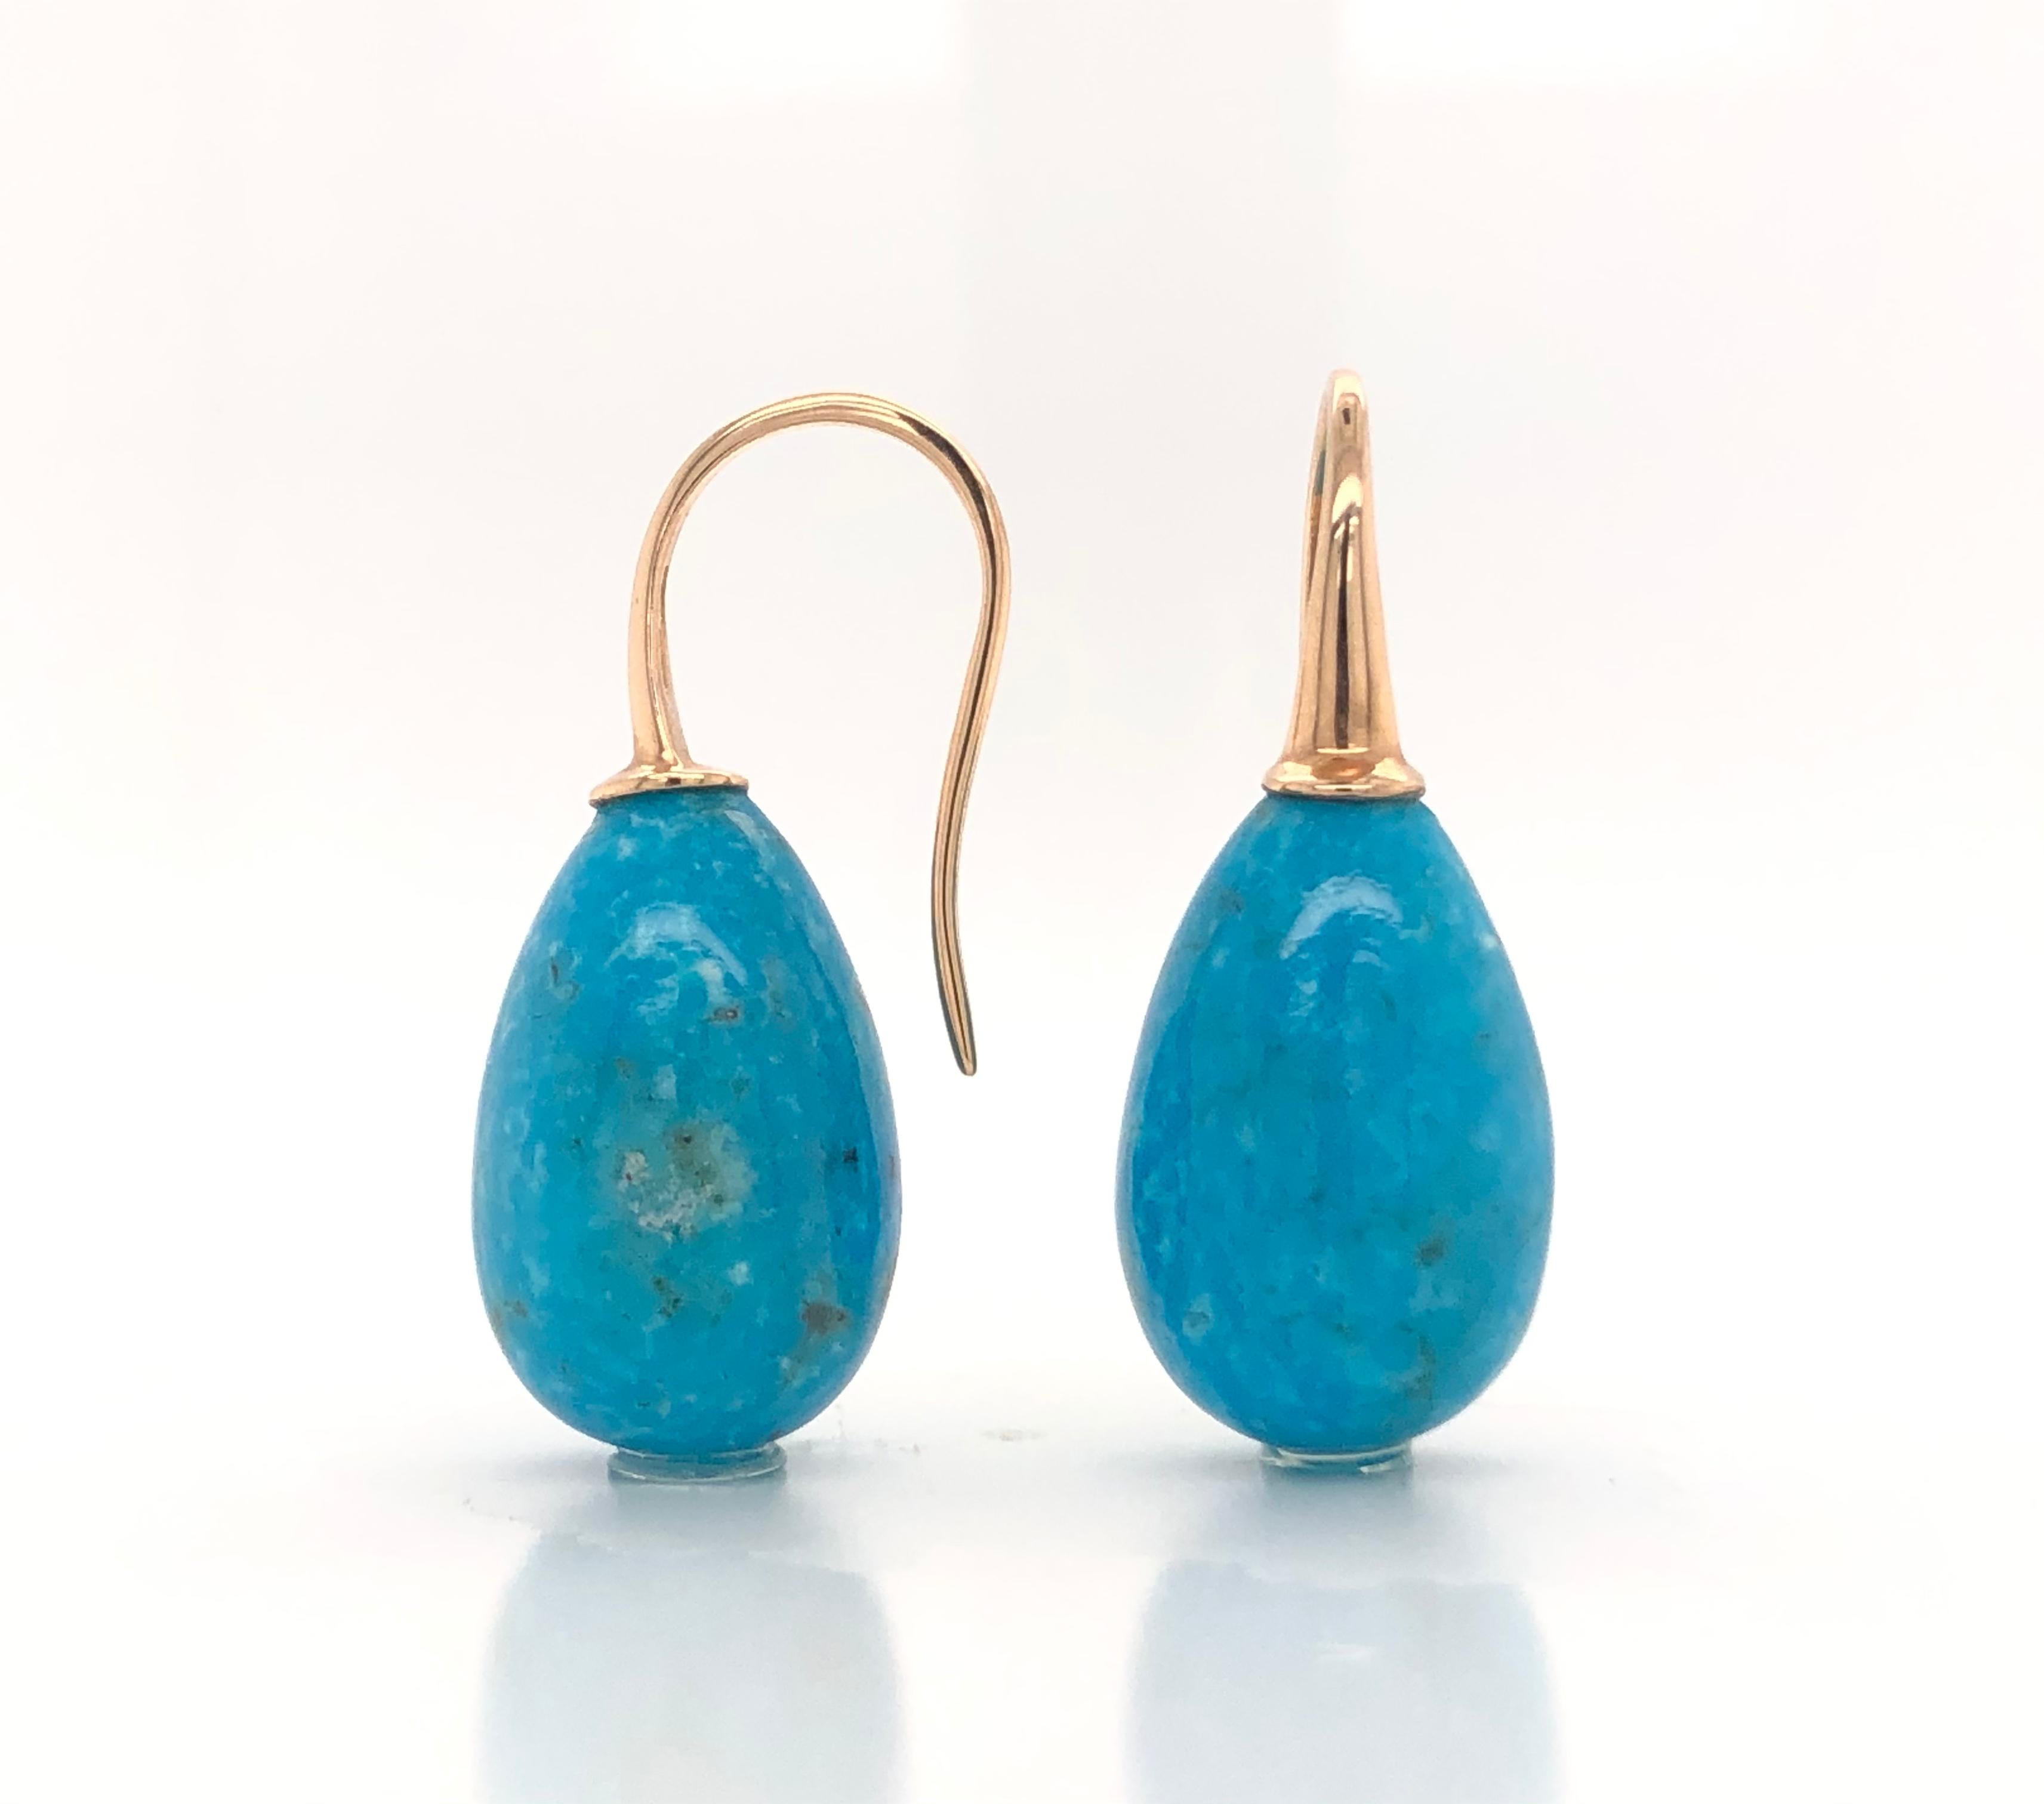 Discover this Turquoise and Yellow Gold 18 Karat Drop Earrings.
Reconstitute Turquoise
Yellow Gold 18 Karat
